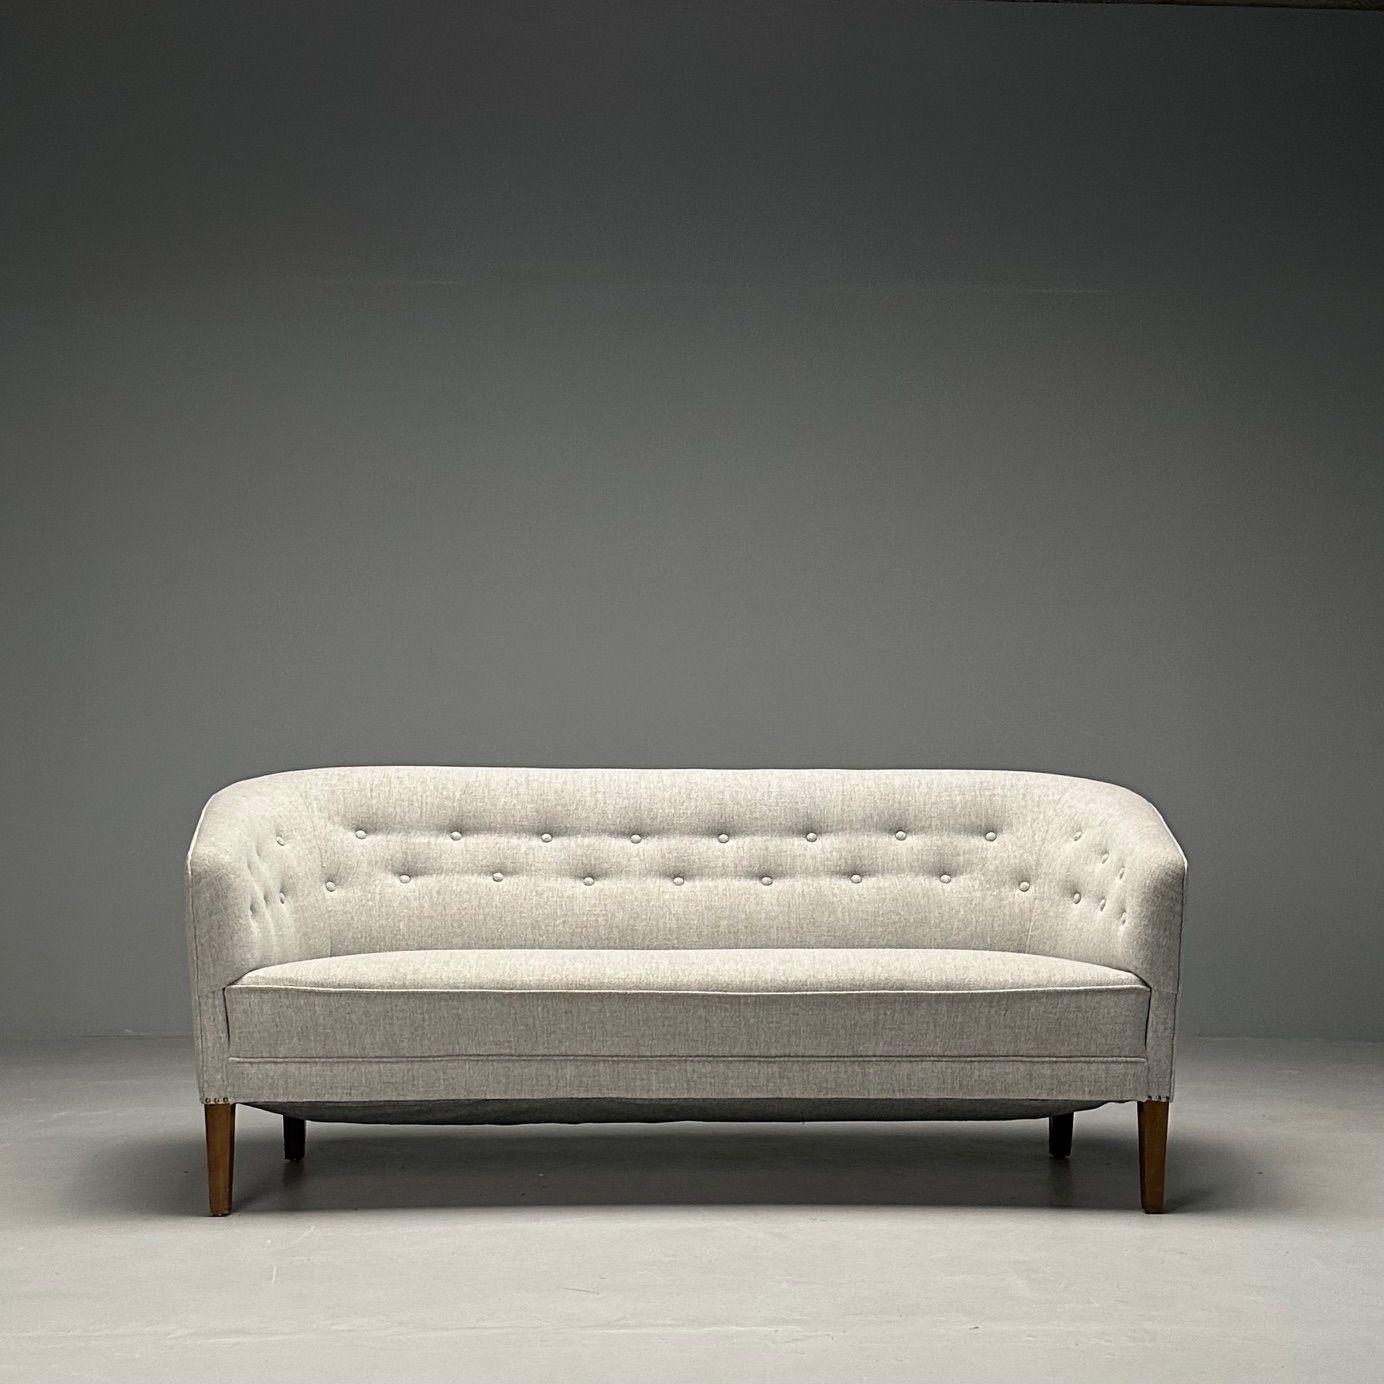 Ludvig Pontoppidan, Danish Mid-Century Modern, Sofa or Settee, Light Gray Wool, Mahogany, 1950s

Danish cabinetmaker sofa designed by Ludvig Pontoppidan in Denmark circa 1950s. This example features a curved back and armrests with tufting and a